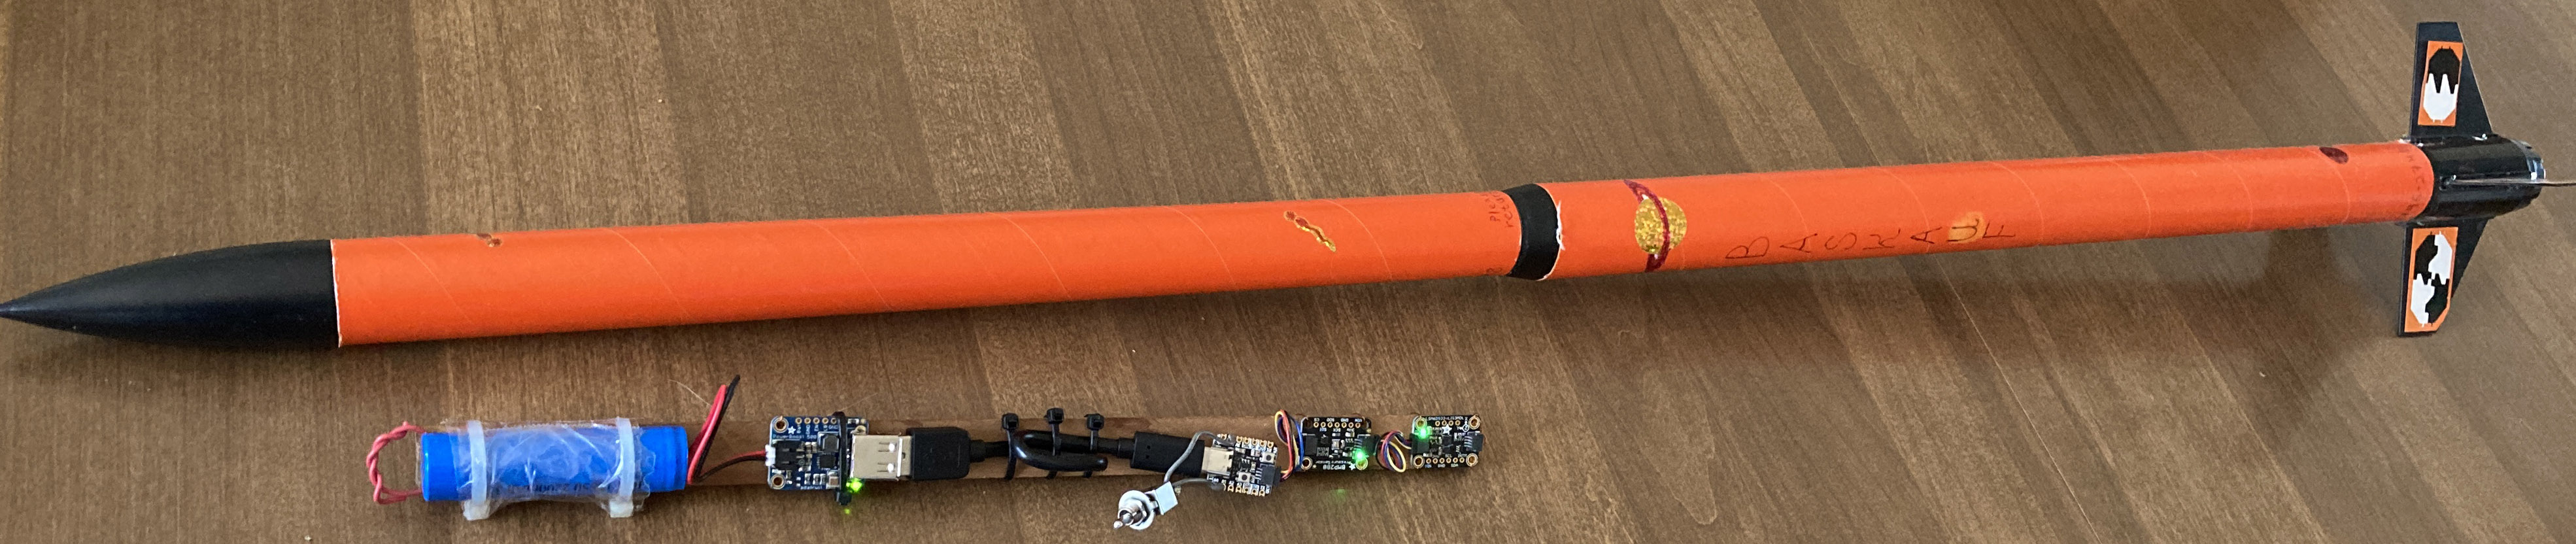 model rocket with microcontroller and sensors